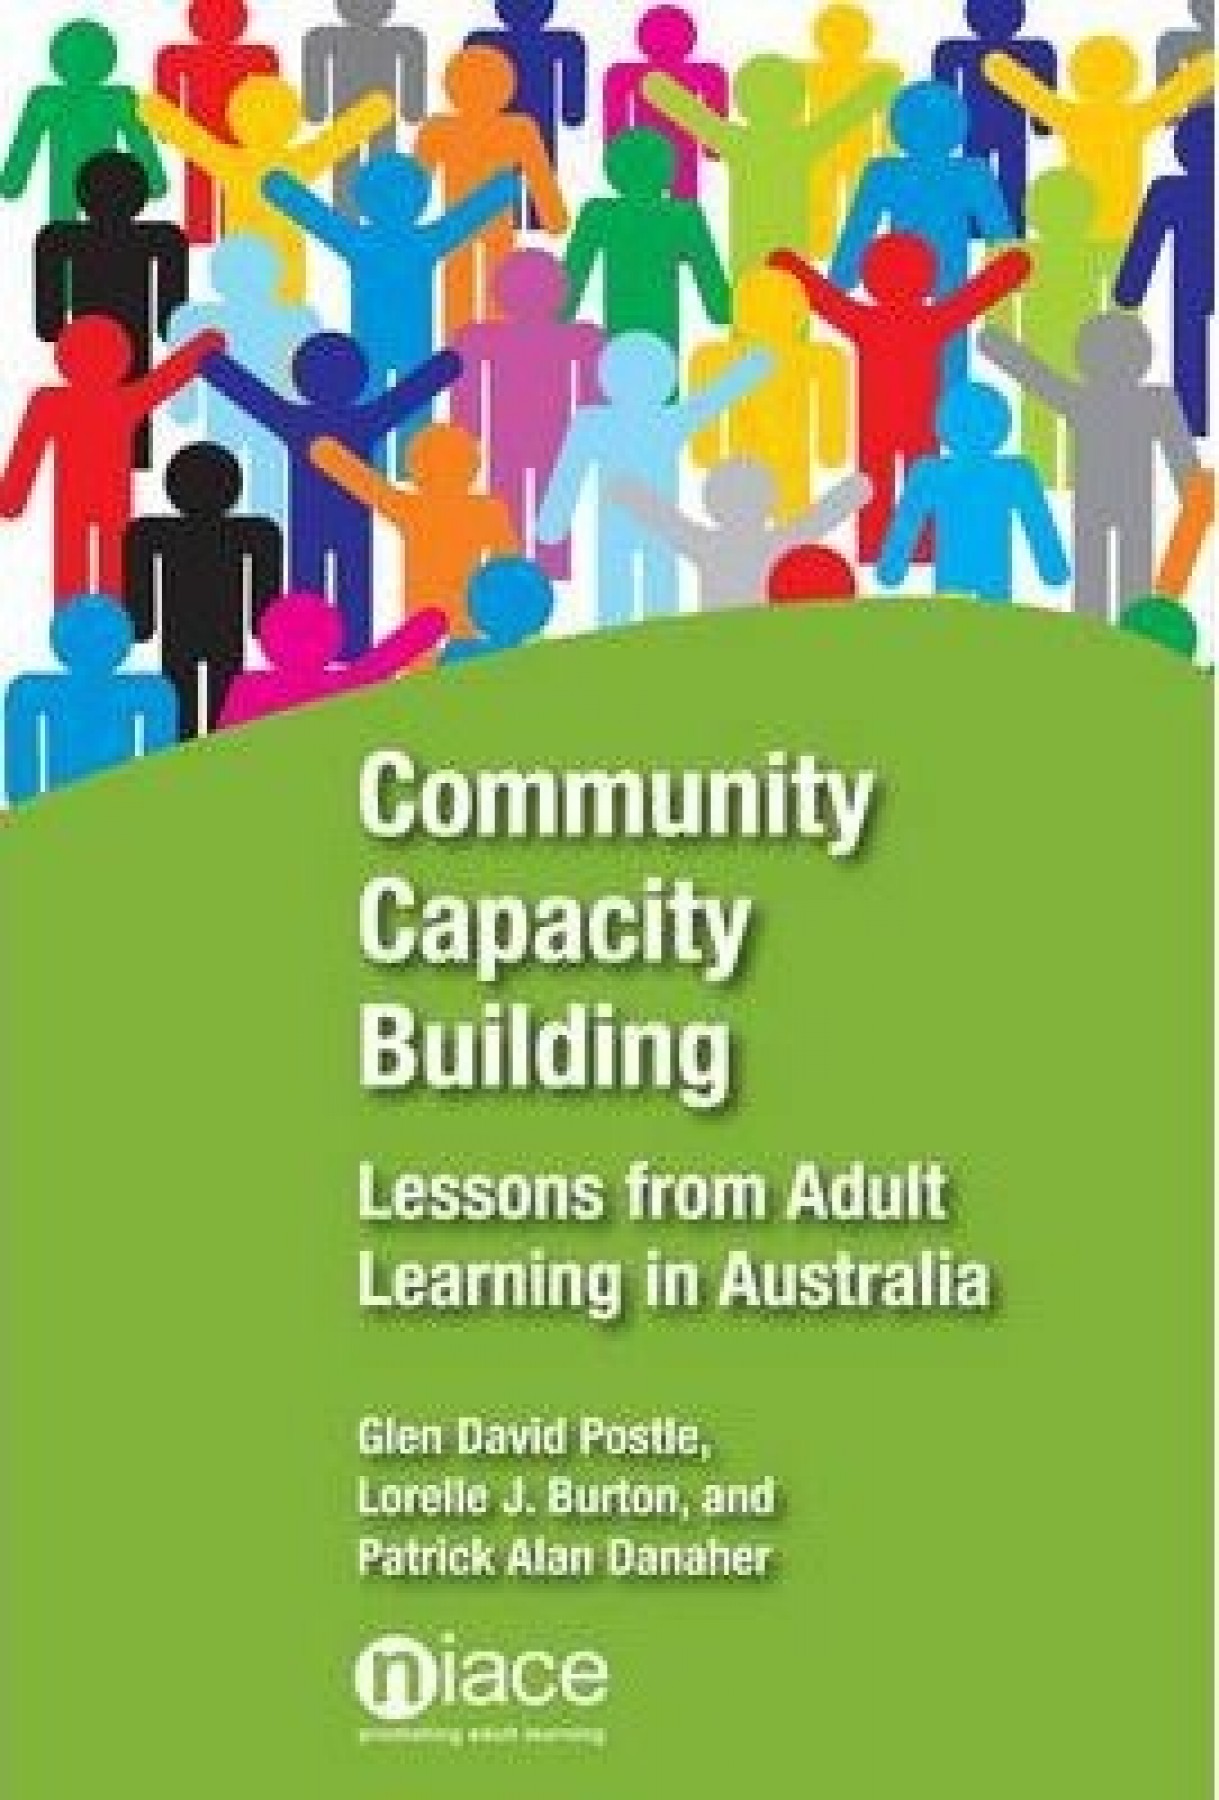 Community Capacity Building: Lessons from adult learning in Australia